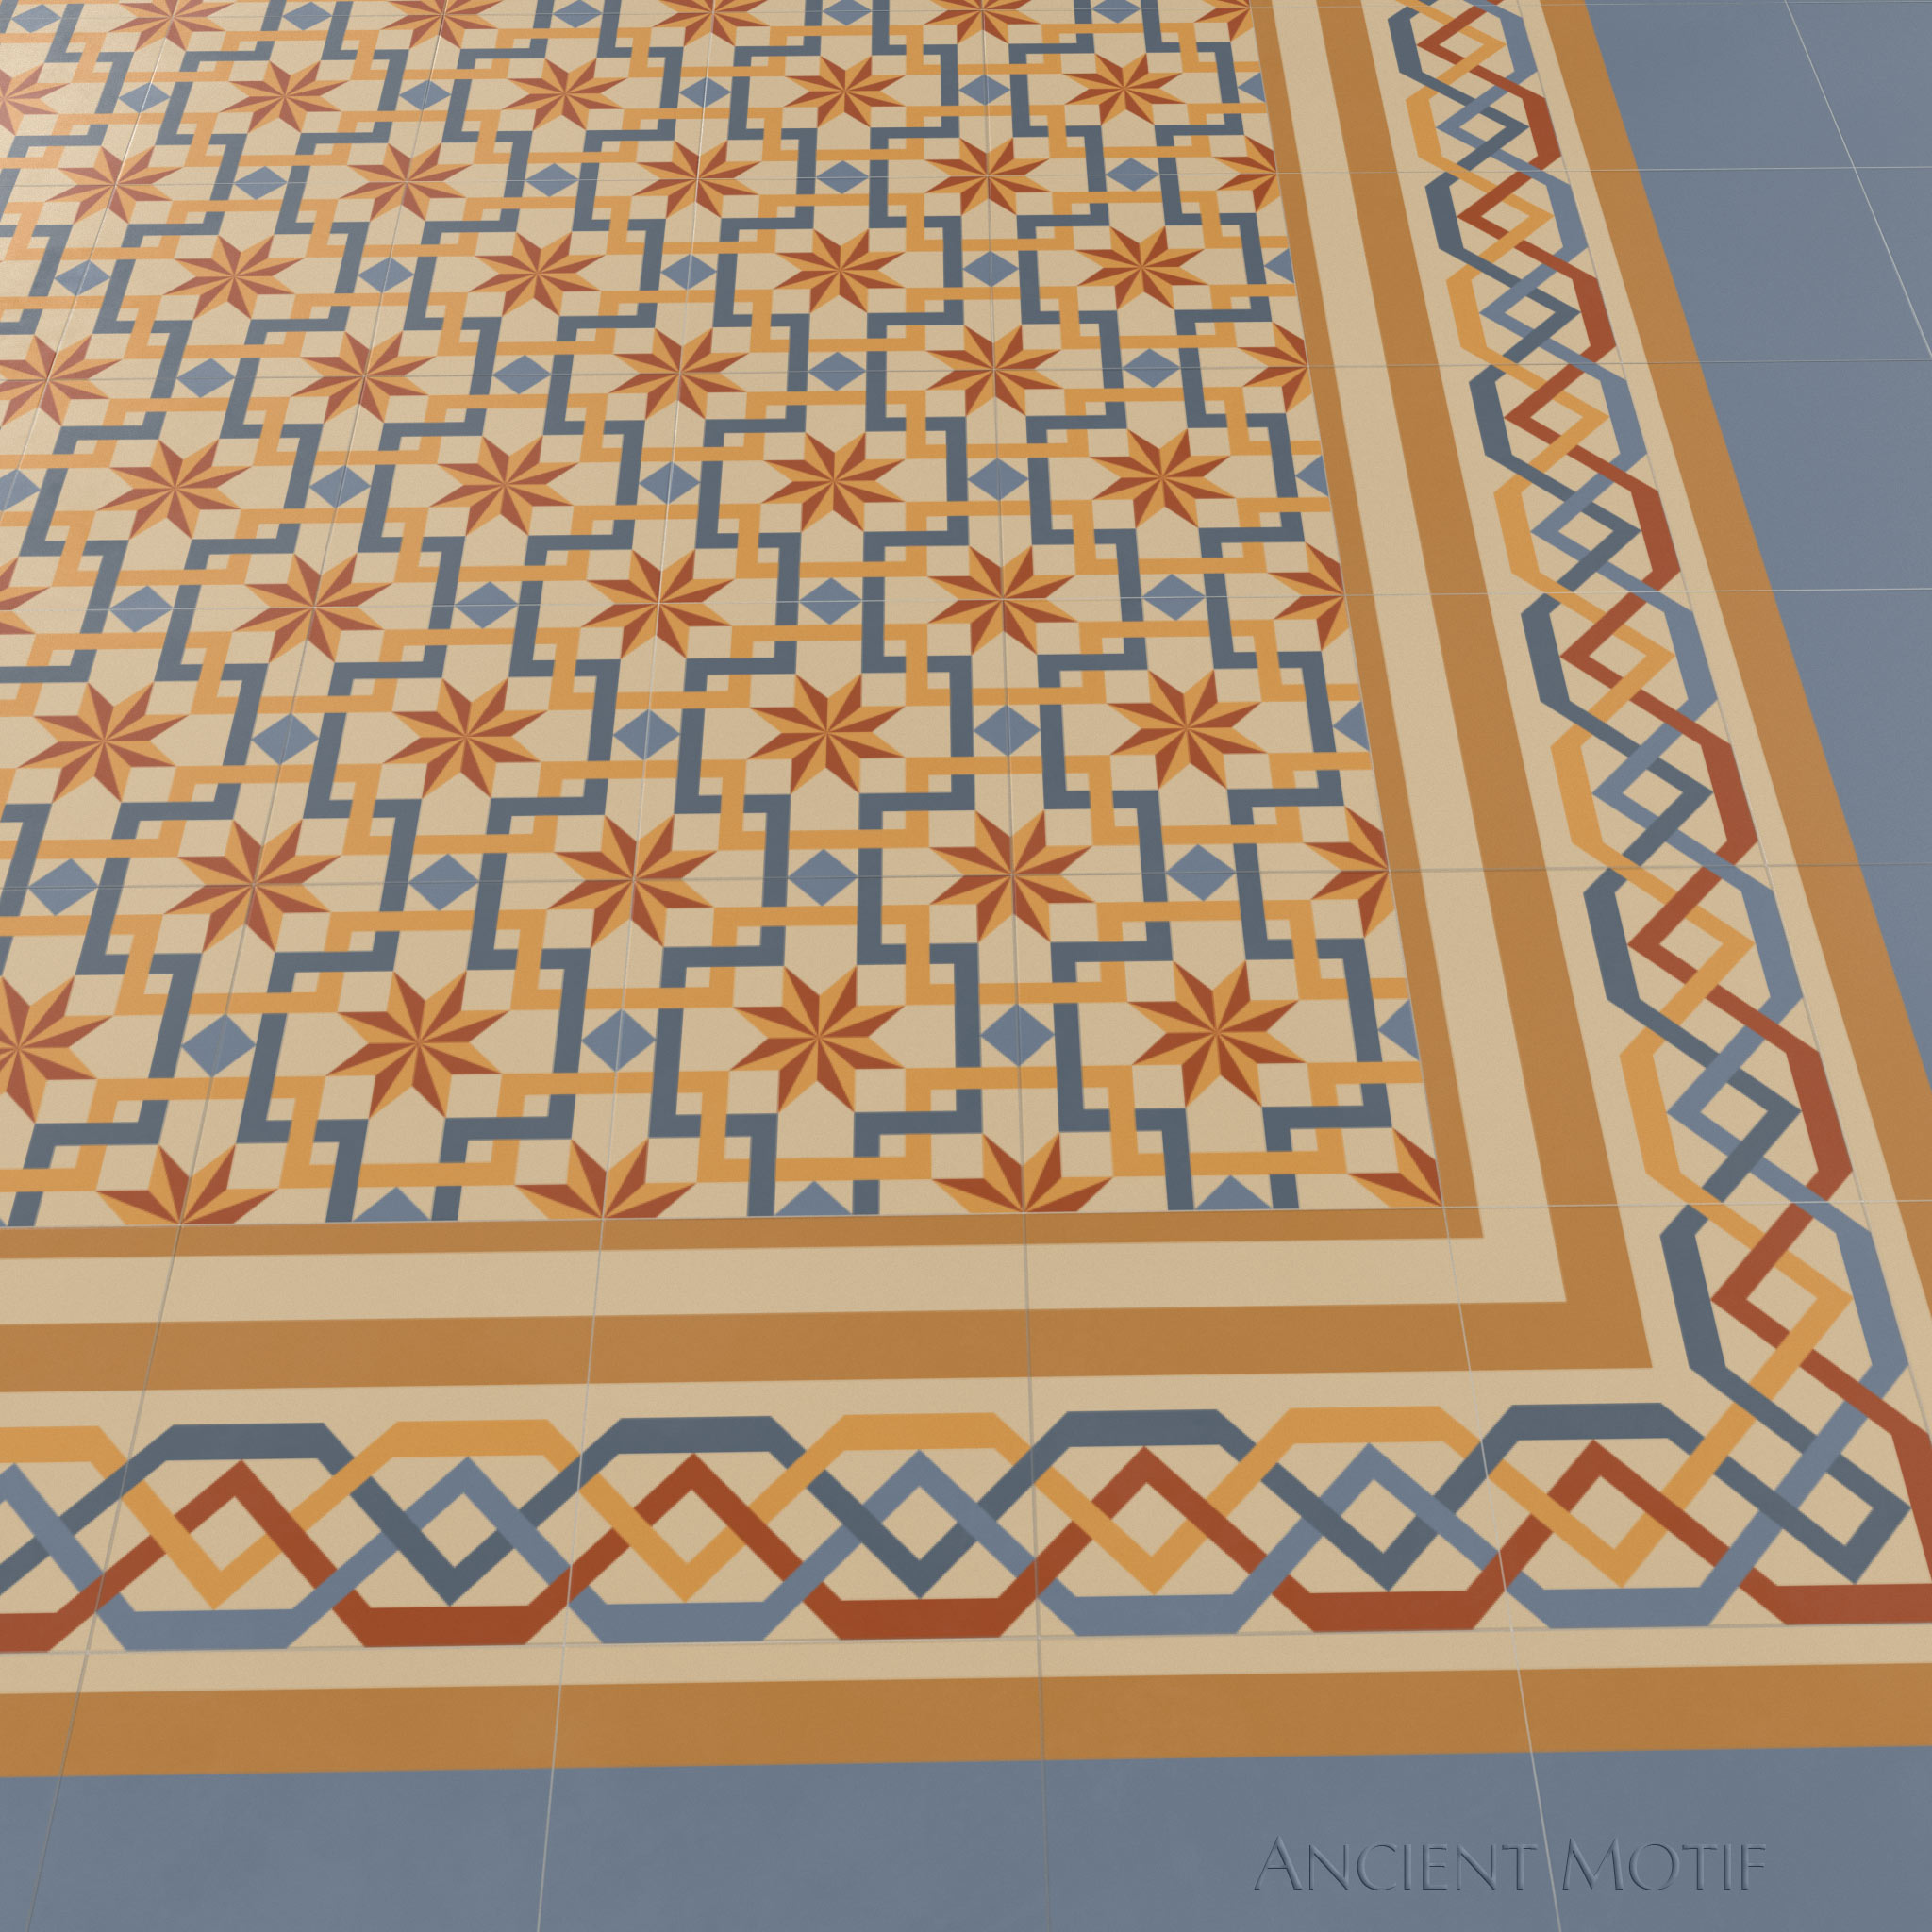 Andalusia Encasutic Cement Tile in Cornflower, Ginger and Apricot